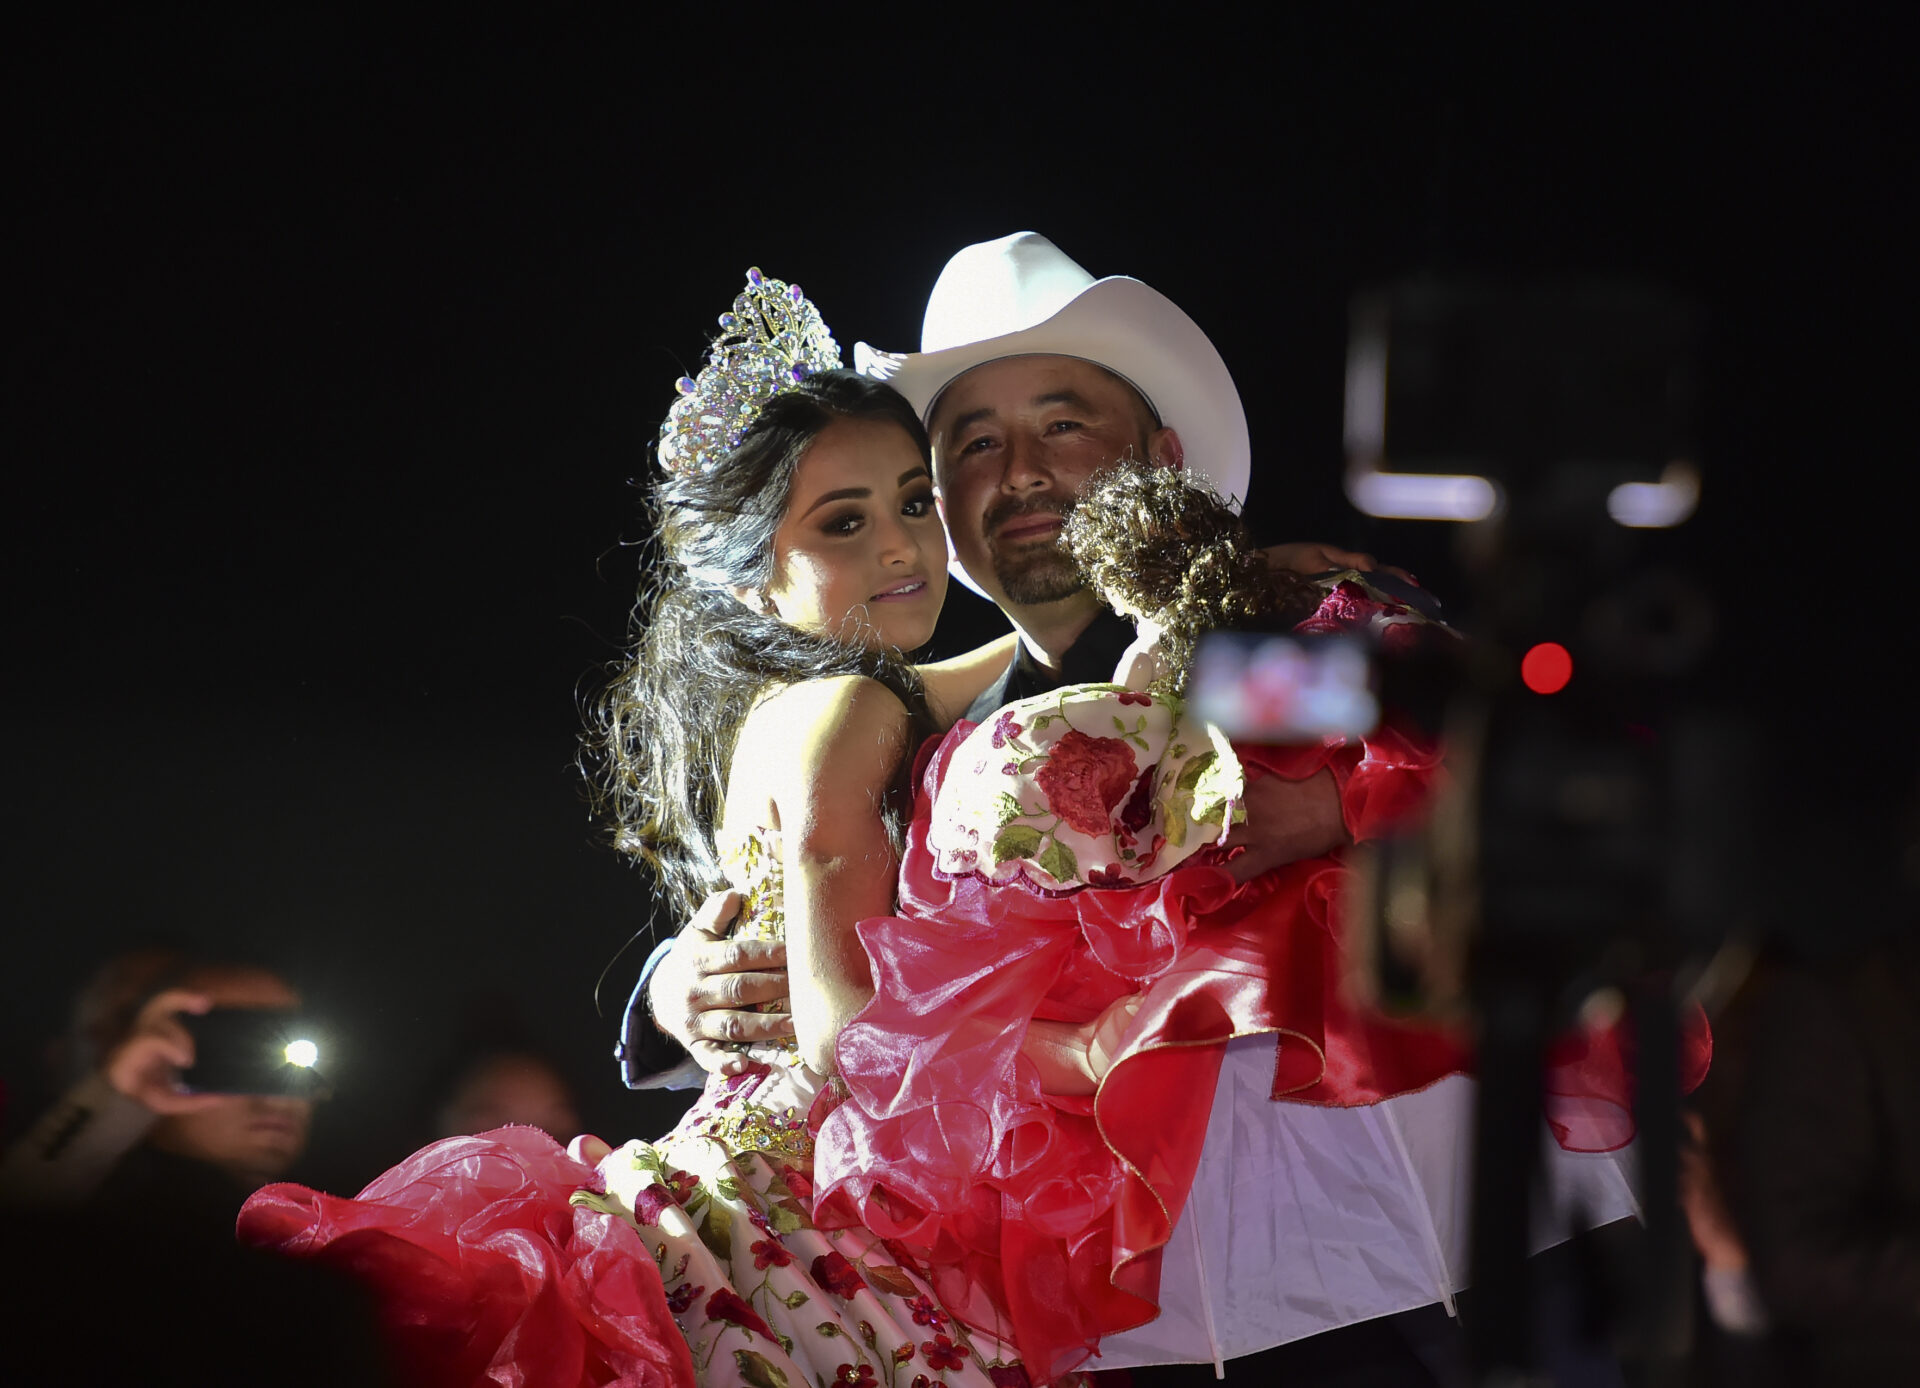 Rubi Ibarra and her father Cresencio Ibarra dance during the celebration of her 15th birthday in Villa Guadalupe, San Luis Potosi State, on December 26, 2016.  Rubi, a small-town Mexican teen, welcomed thousands of guests for her 15th birthday party  after her parents' video invitation to the milestone event went viral online.  / AFP PHOTO / RONALDO SCHEMIDT